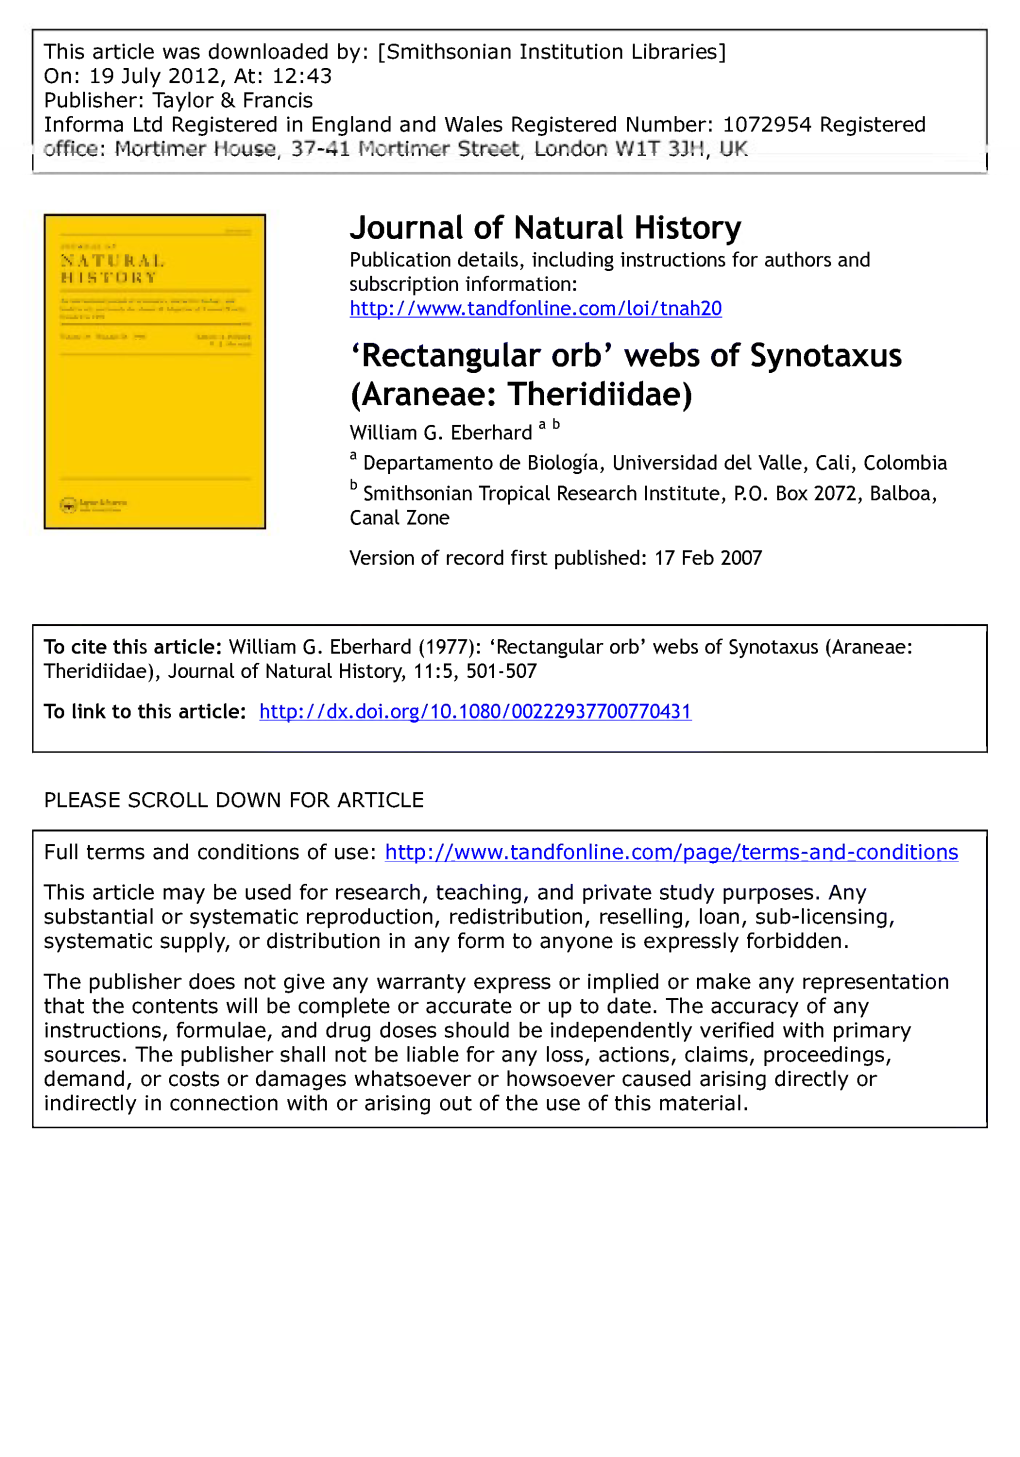 Journal of Natural History 'Rectangular Orb' Webs of Synotaxus (Araneae: Theridiidae)